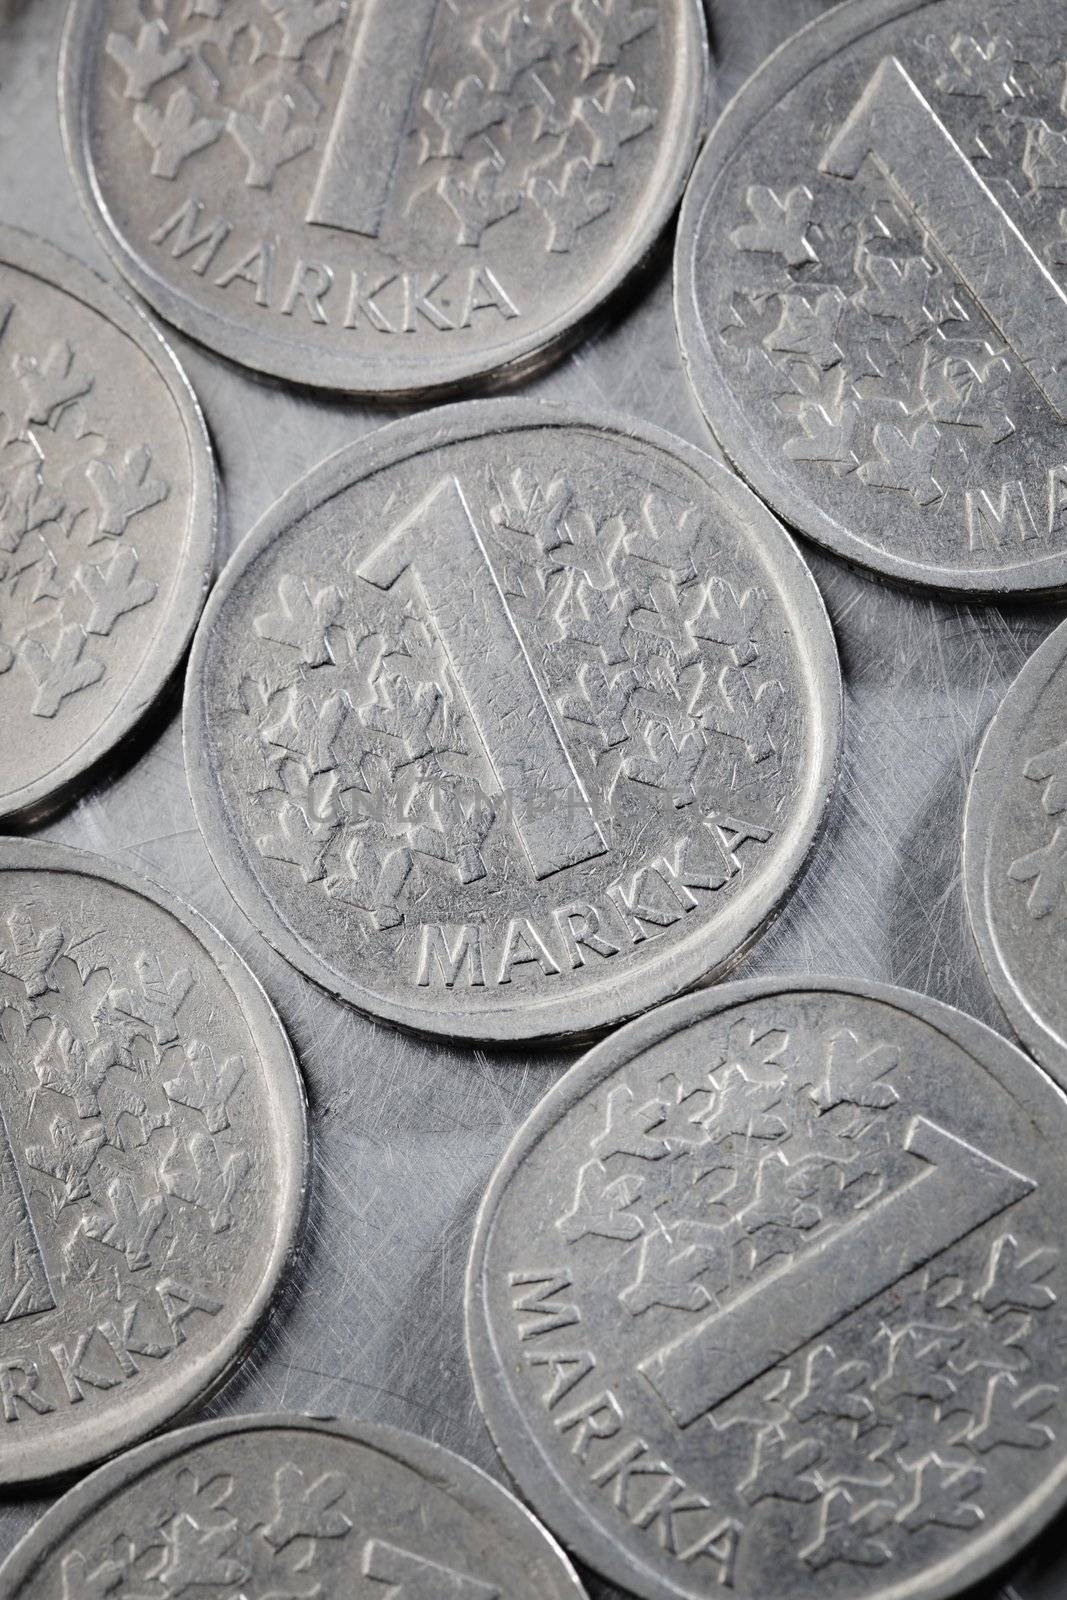 Finnish 1 Markka coins. This type of coin was struck and used between 1964 and 1993.